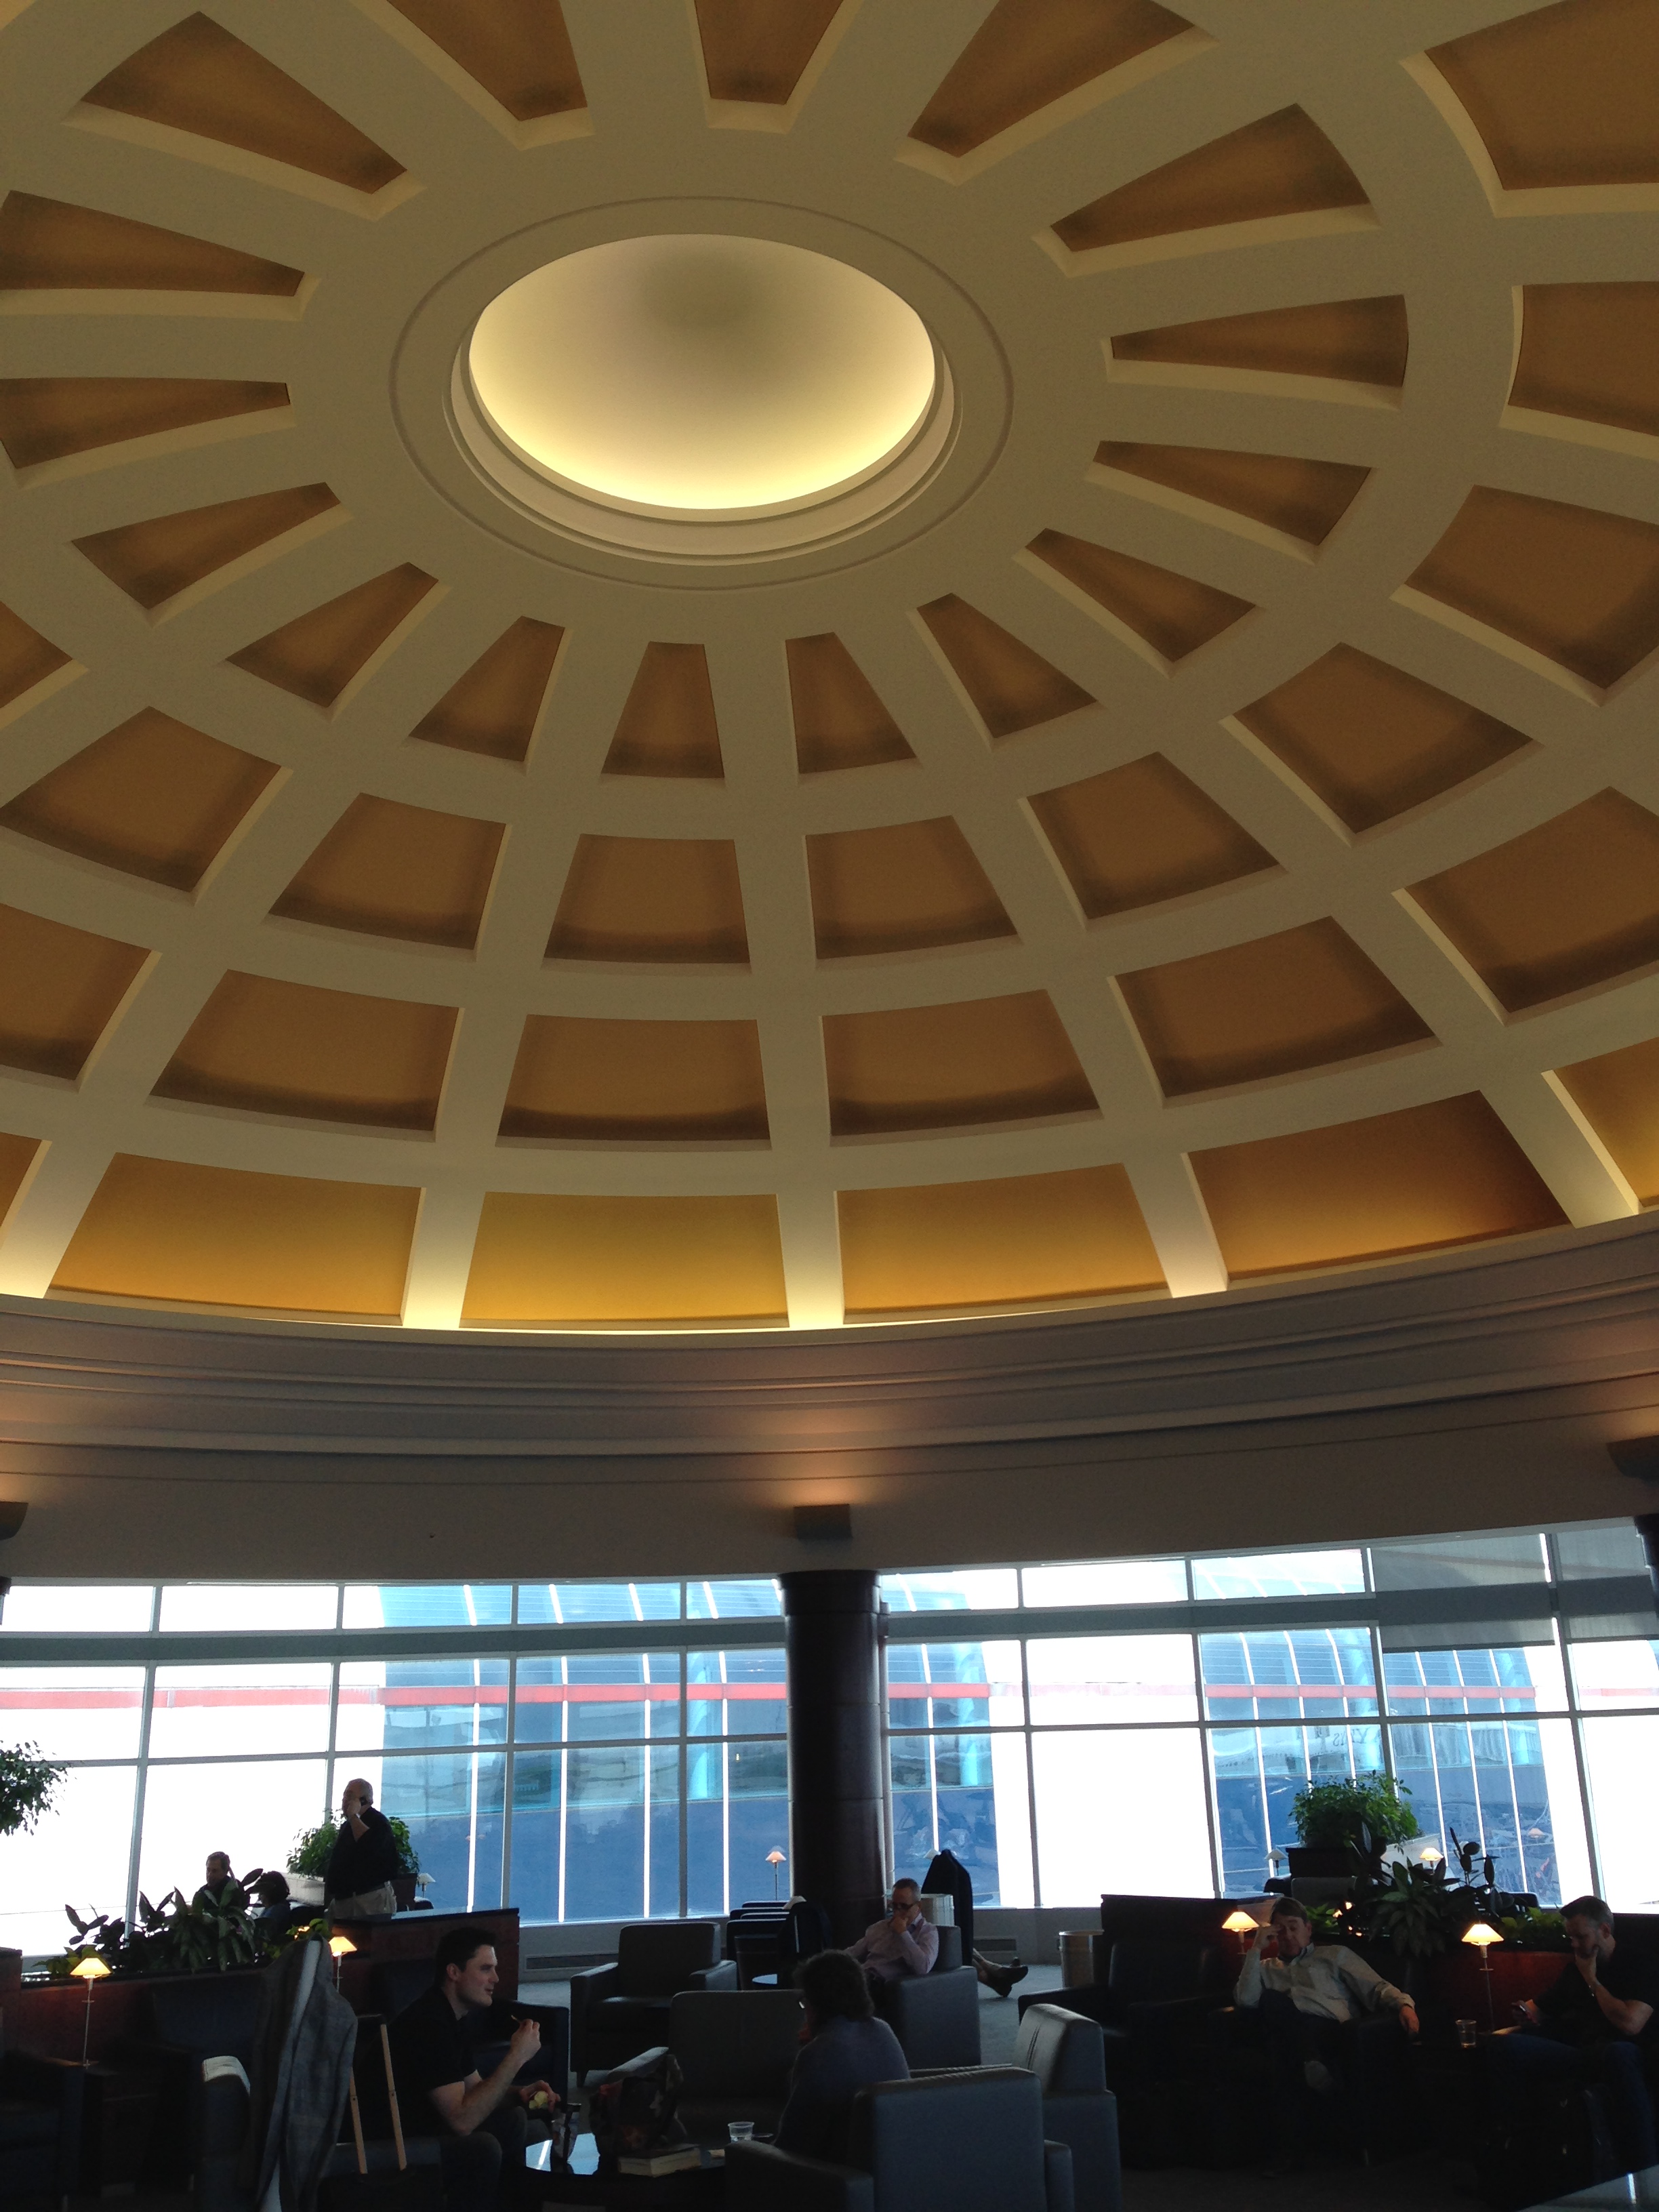 a large domed ceiling with a circular light